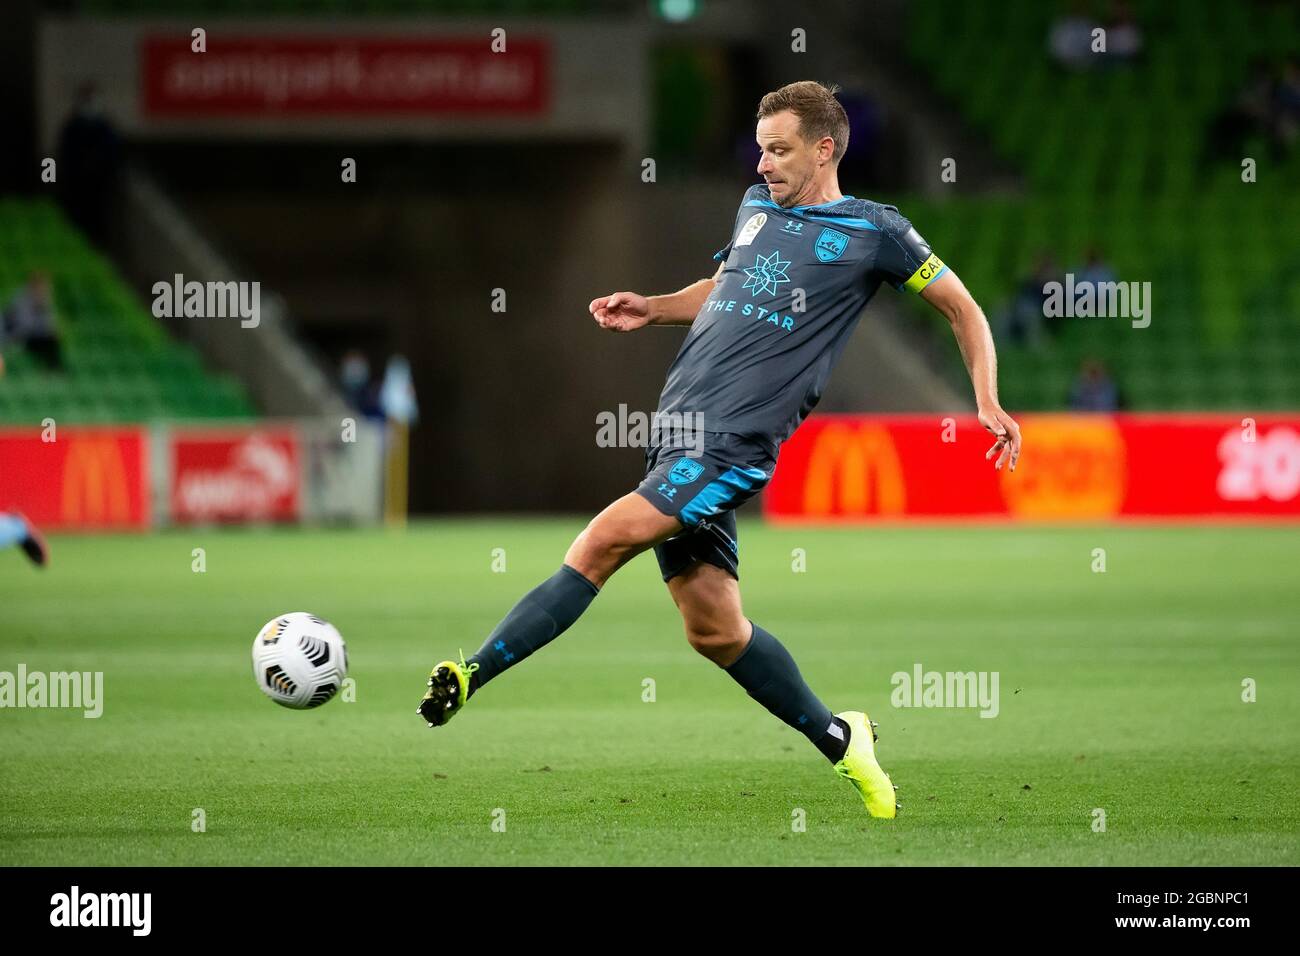 MELBOURNE, AUSTRALIA - FEBRUARY 23: Alex Wilkinson of Sydney FC kicks the ball during the Hyundai A-League soccer match between Melbourne City FC and Sydney FC on February 23, 2021 at AAMI Park in Melbourne, Australia. Credit: Dave Hewison/Speed Media/Alamy Live News Stock Photo